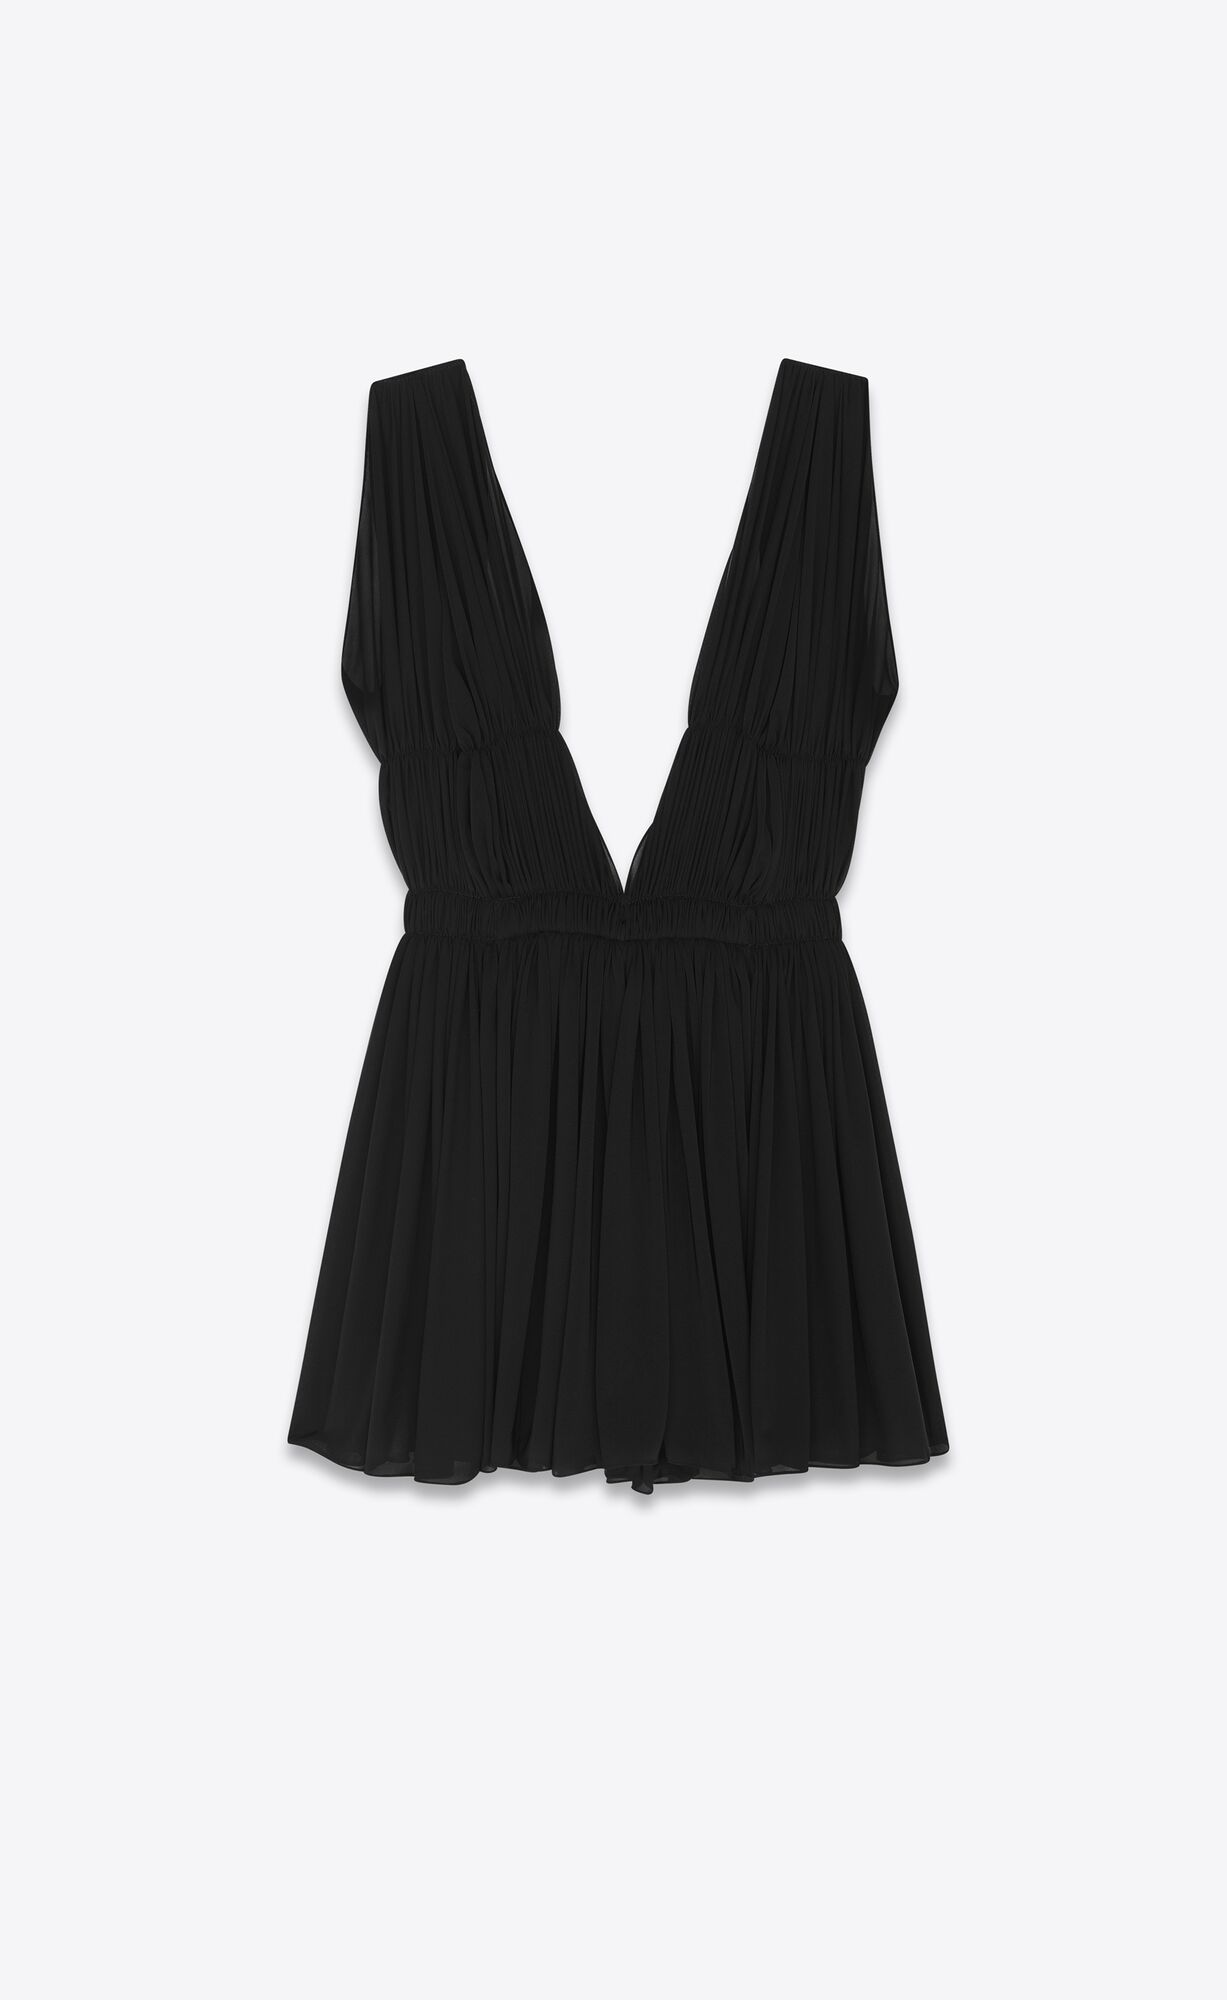 Women's Clothing Collection | Ready-to-Wear | Saint Laurent | YSL